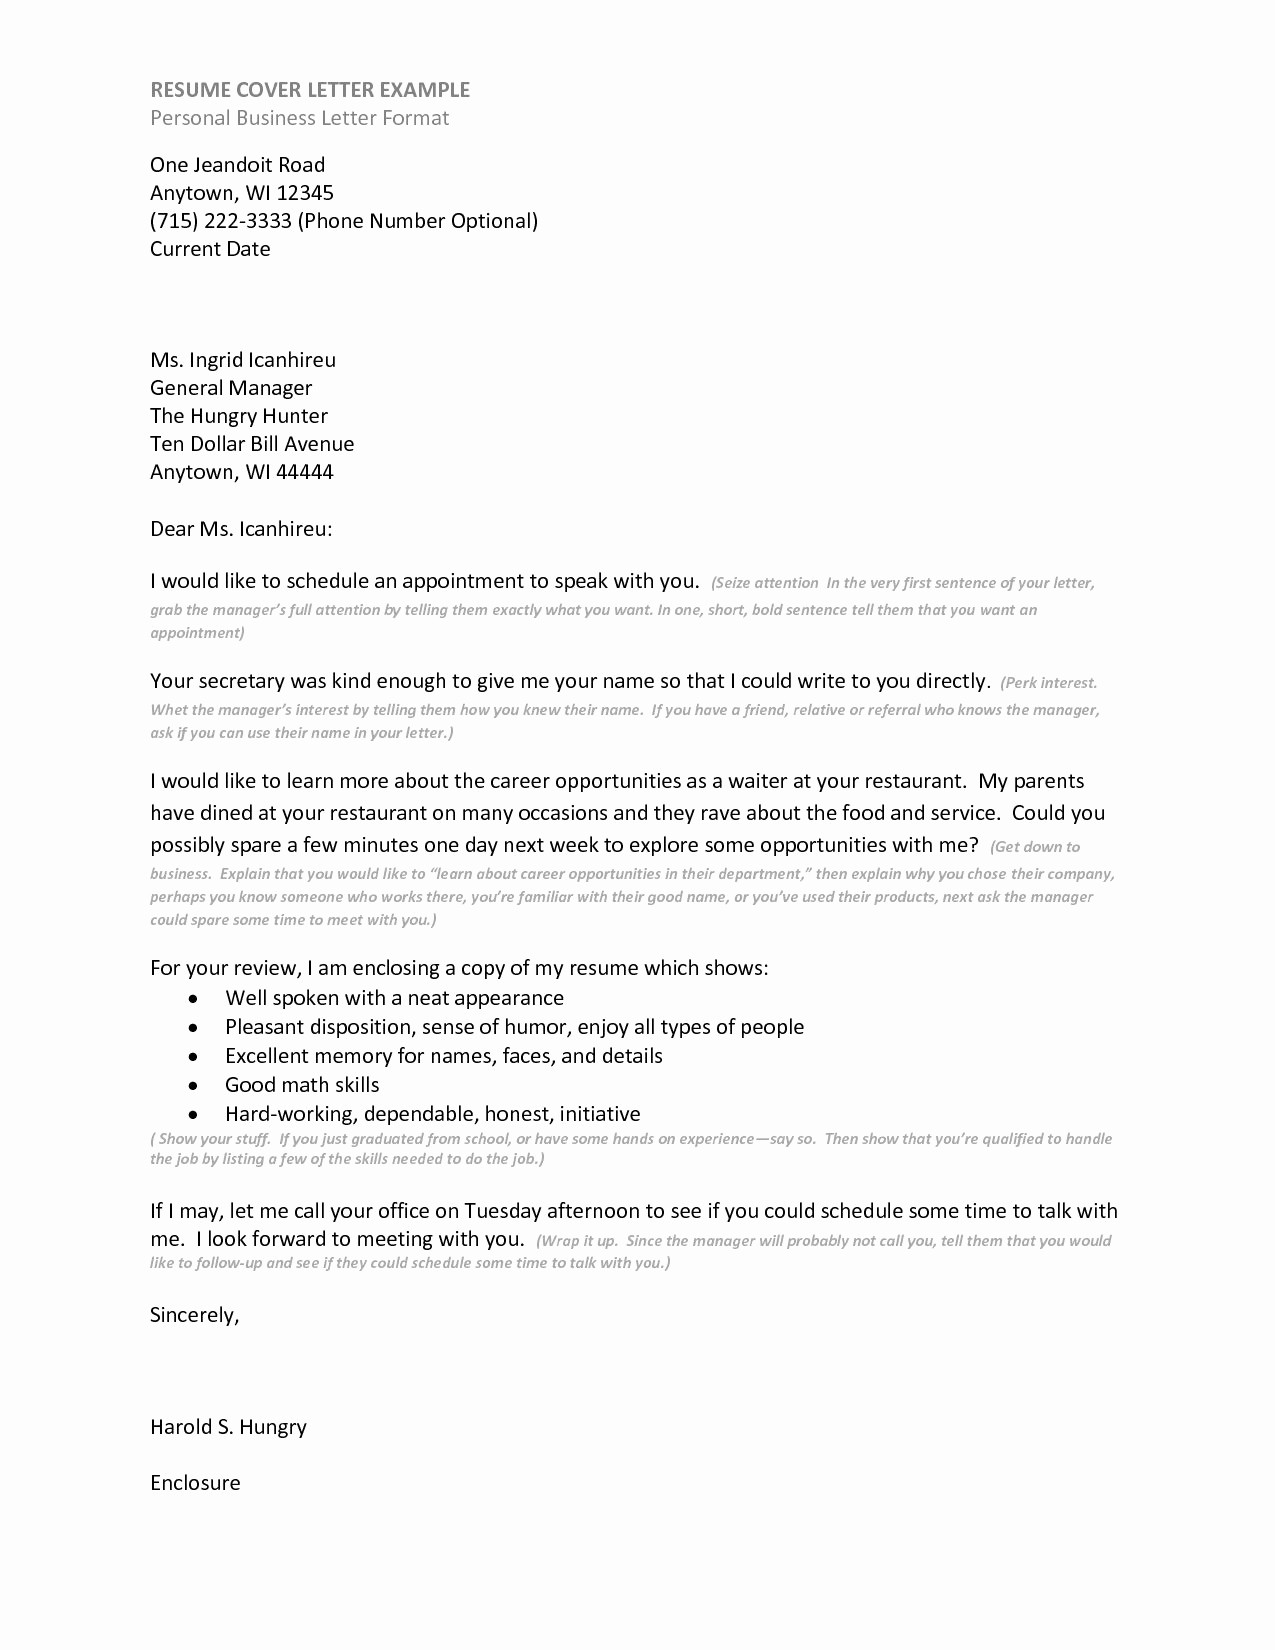 Formal Business Letter format Template Luxury formal Business Cover Letter format